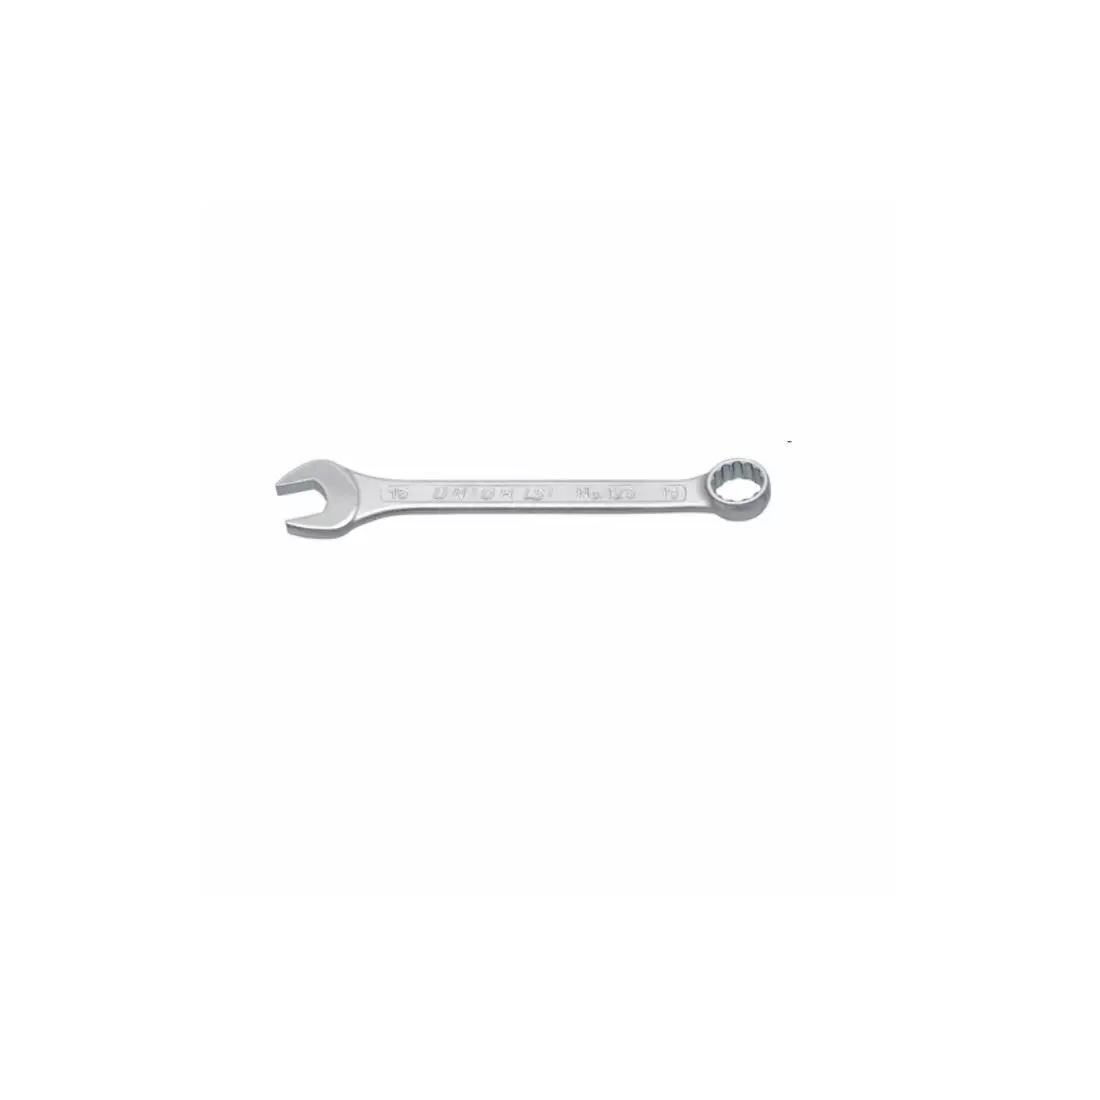 UNIOR combination wrench, short type no 24 